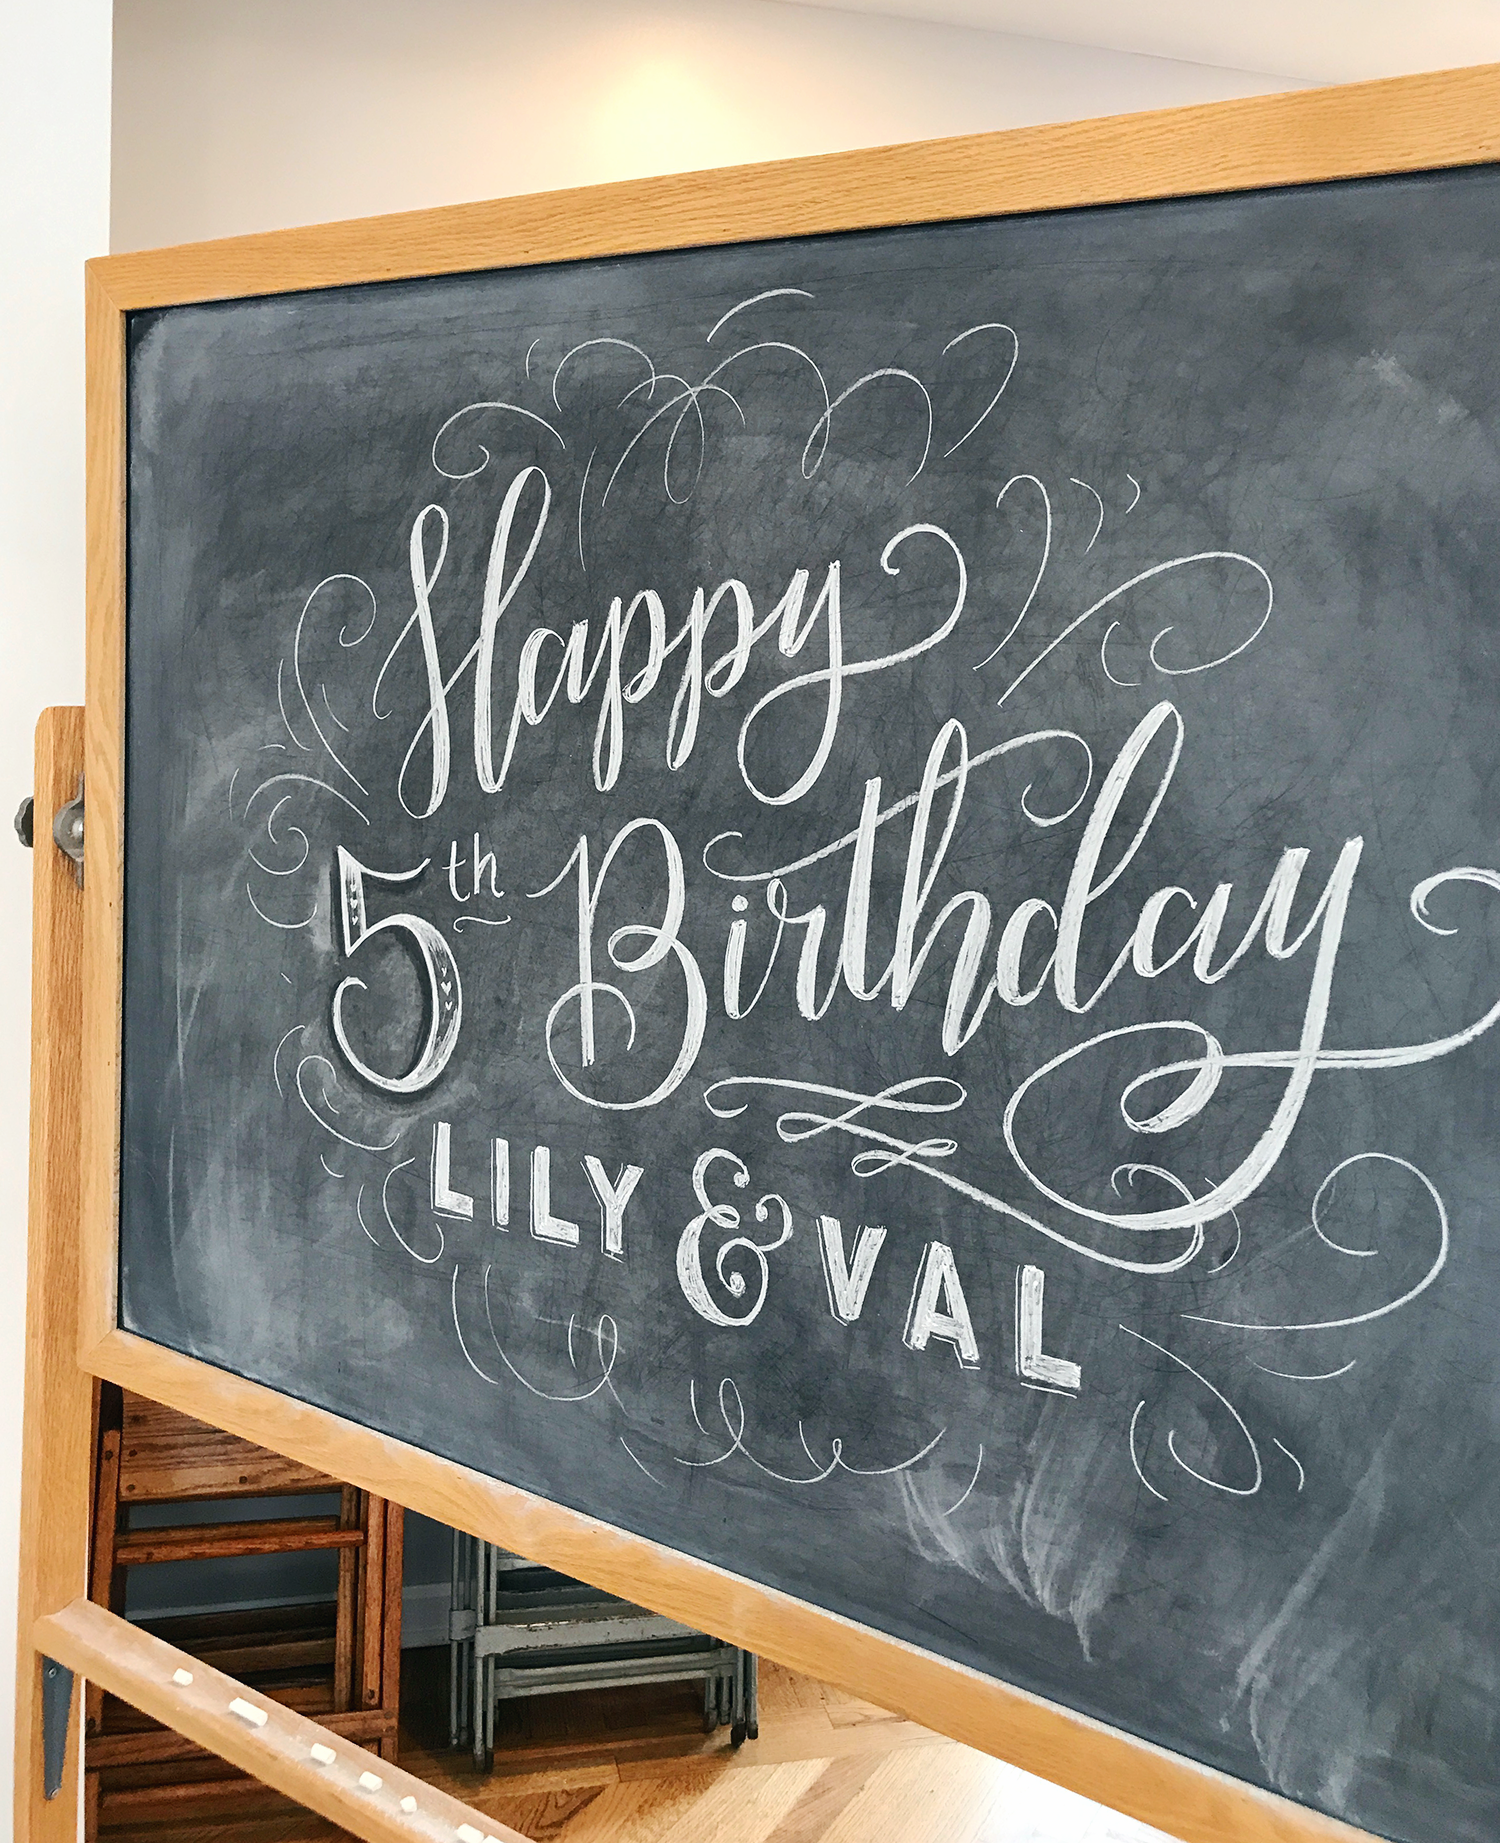 Lily & Val turns 5 today! Thank you for an amazing 5 years